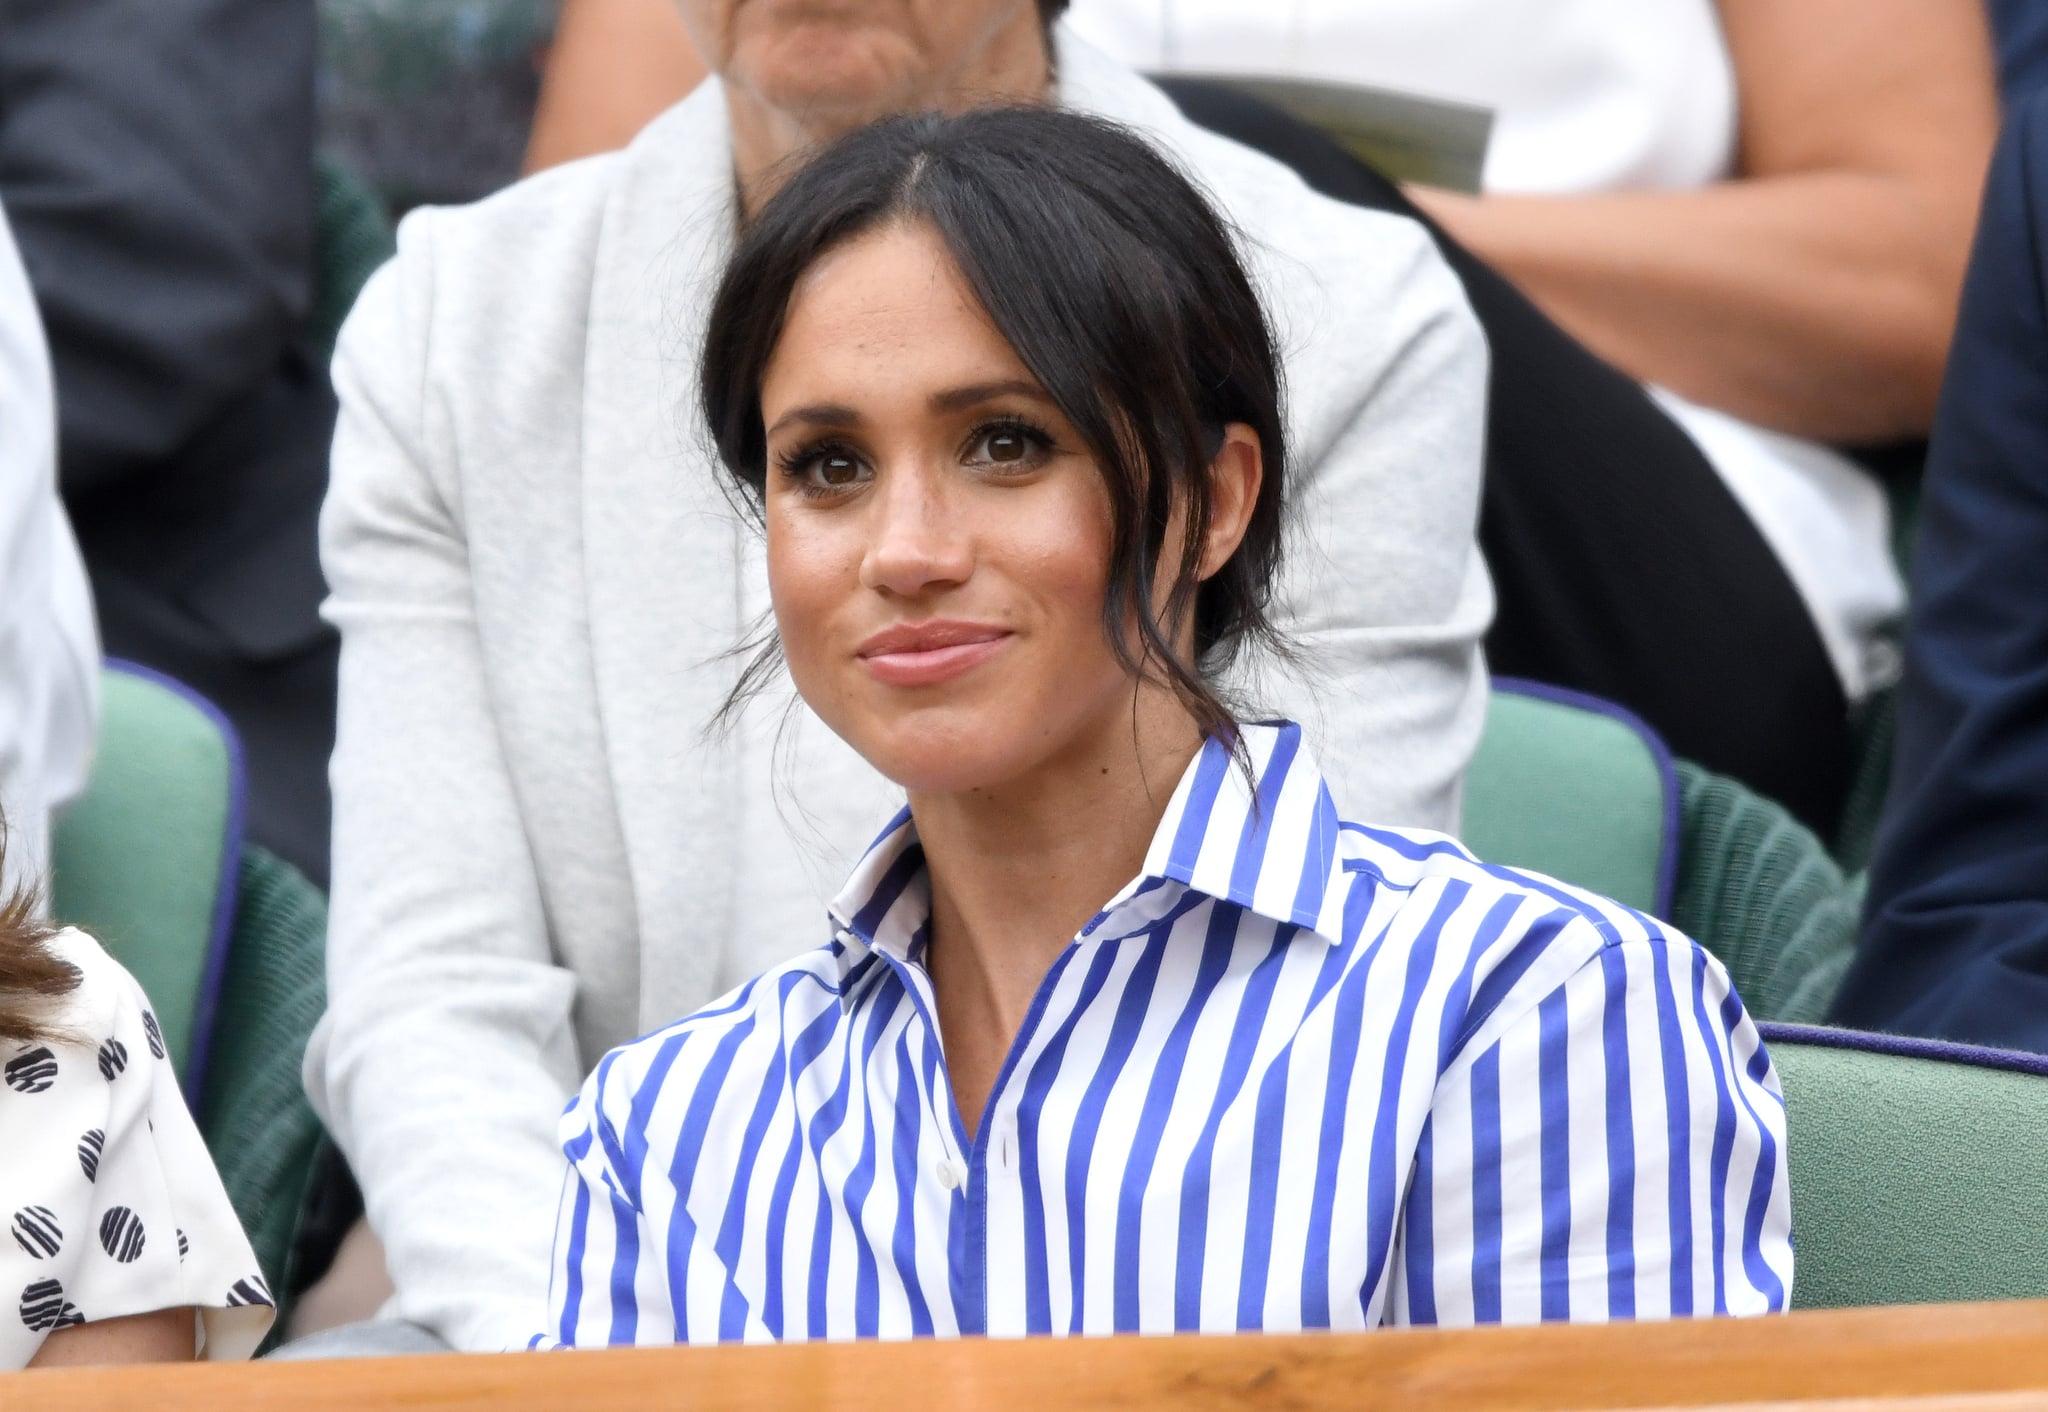 LONDON, ENGLAND - JULY 14:  Meghan, Duchess of Sussex attends day twelve of the Wimbledon Tennis Championships at the All England Lawn Tennis and Croquet Club on July 14, 2018 in London, England.  (Photo by Karwai Tang/WireImage )